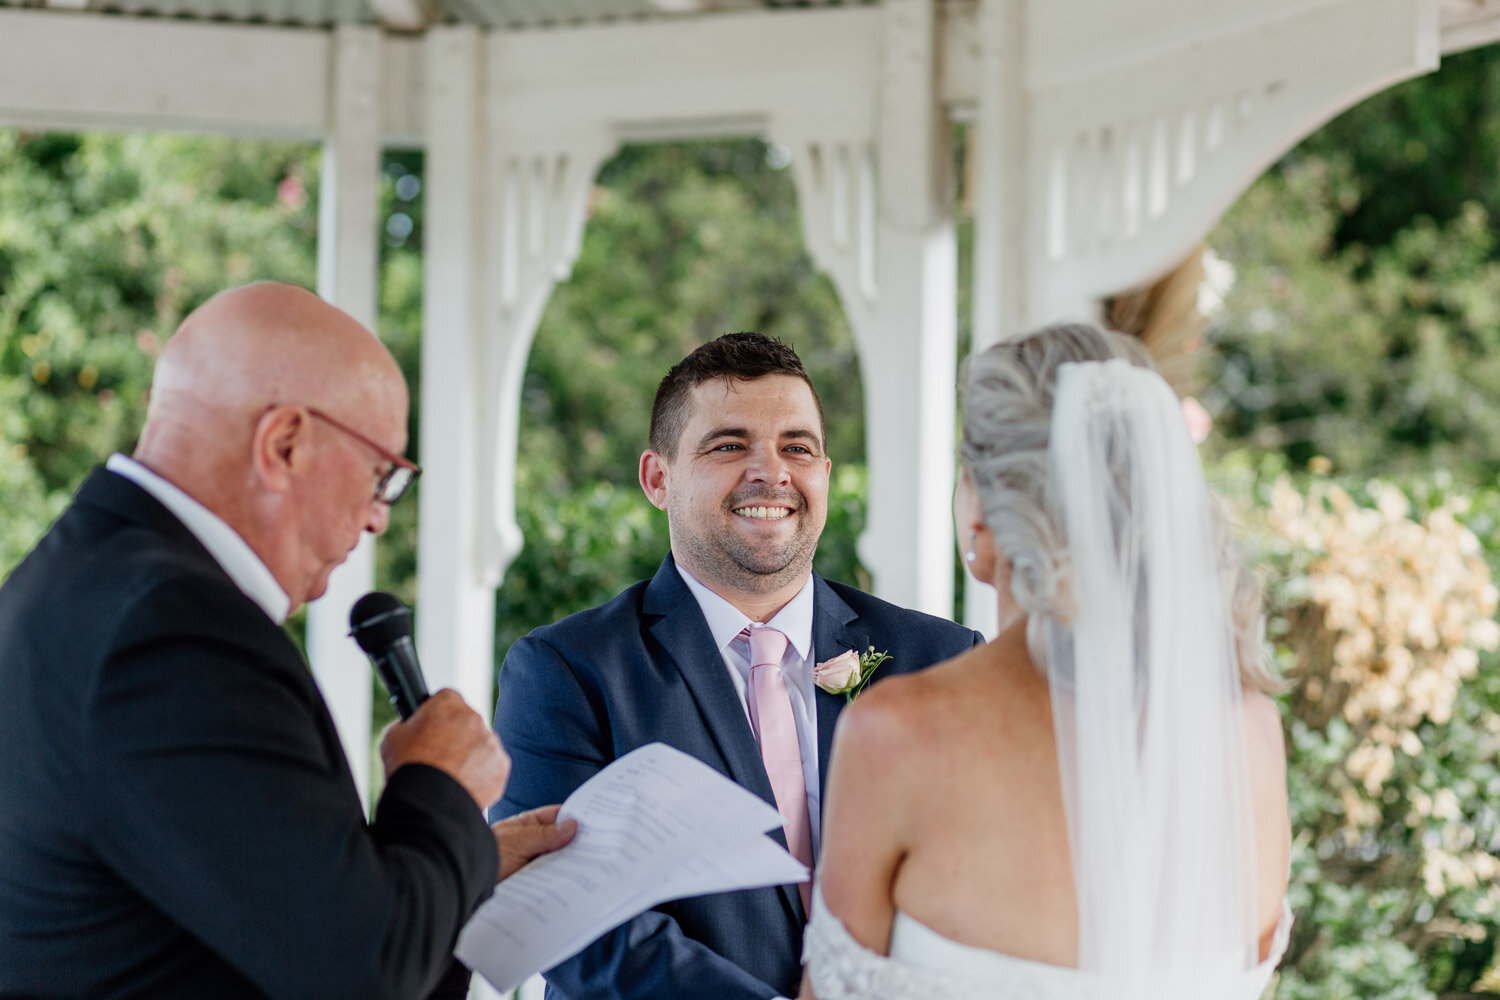 smiling groom at wedding ceremony